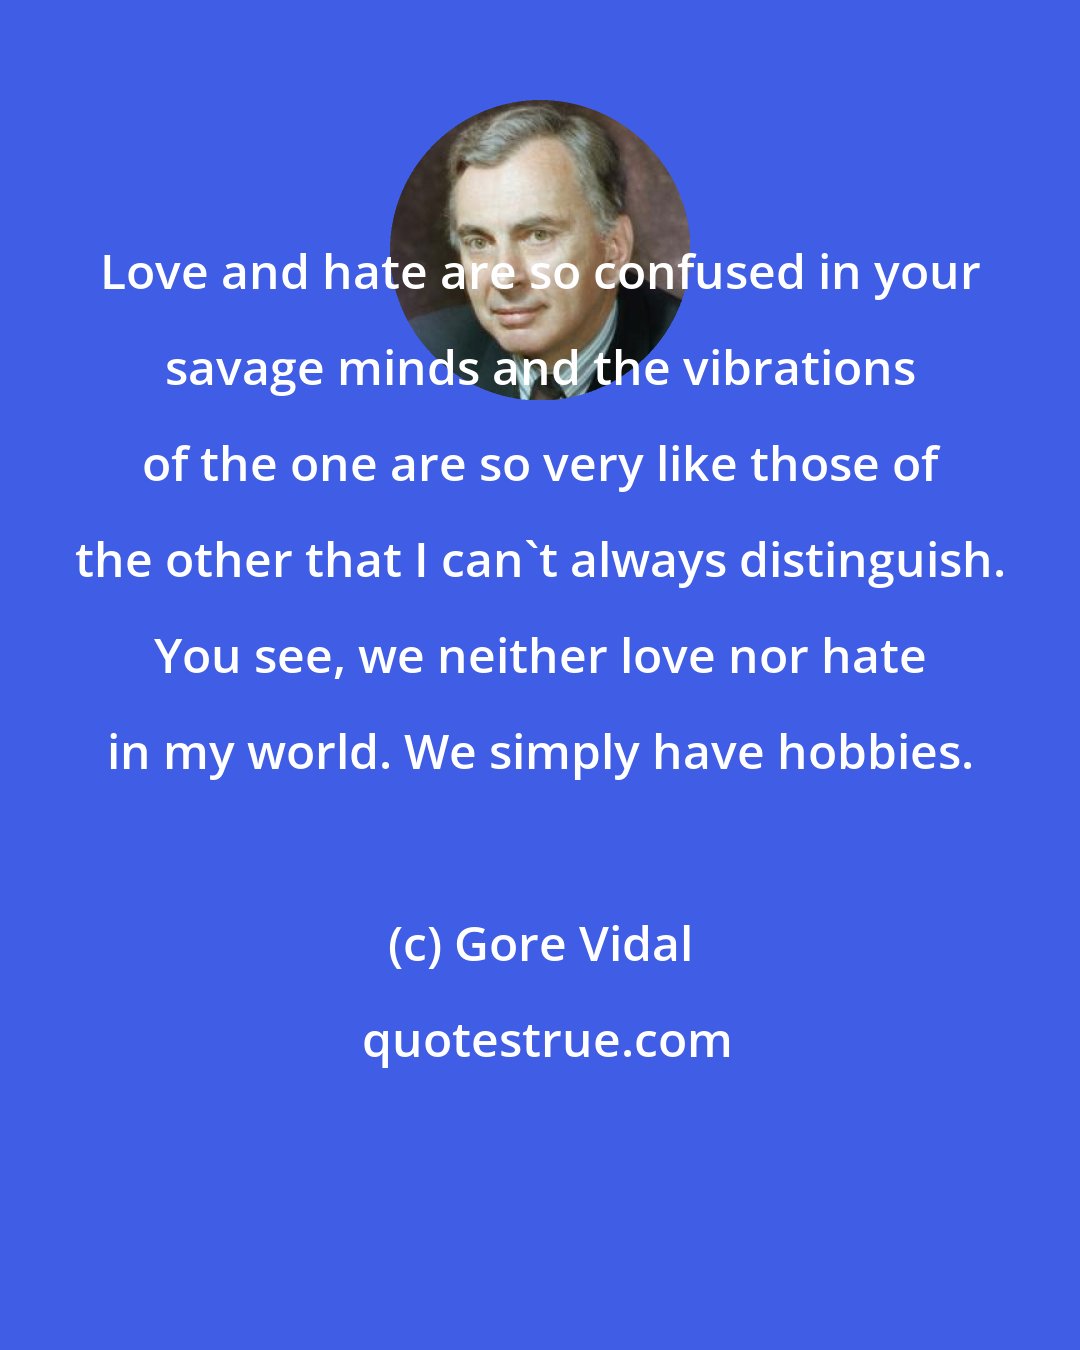 Gore Vidal: Love and hate are so confused in your savage minds and the vibrations of the one are so very like those of the other that I can't always distinguish. You see, we neither love nor hate in my world. We simply have hobbies.